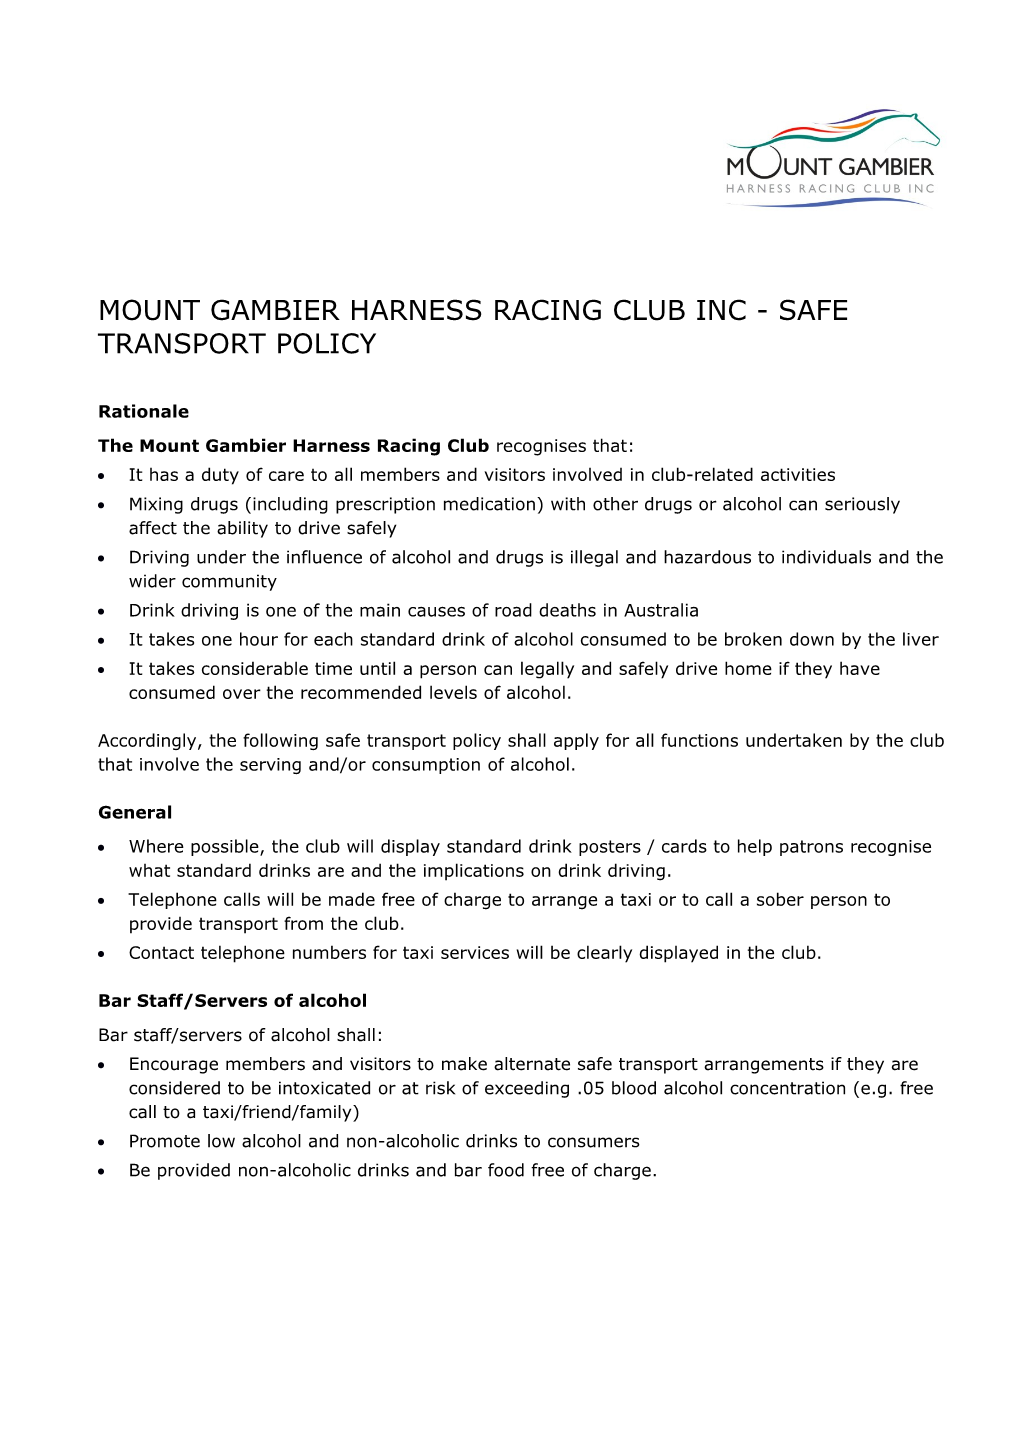 MOUNT GAMBIER HARNESS RACING CLUB INC - Safe Transport Policy